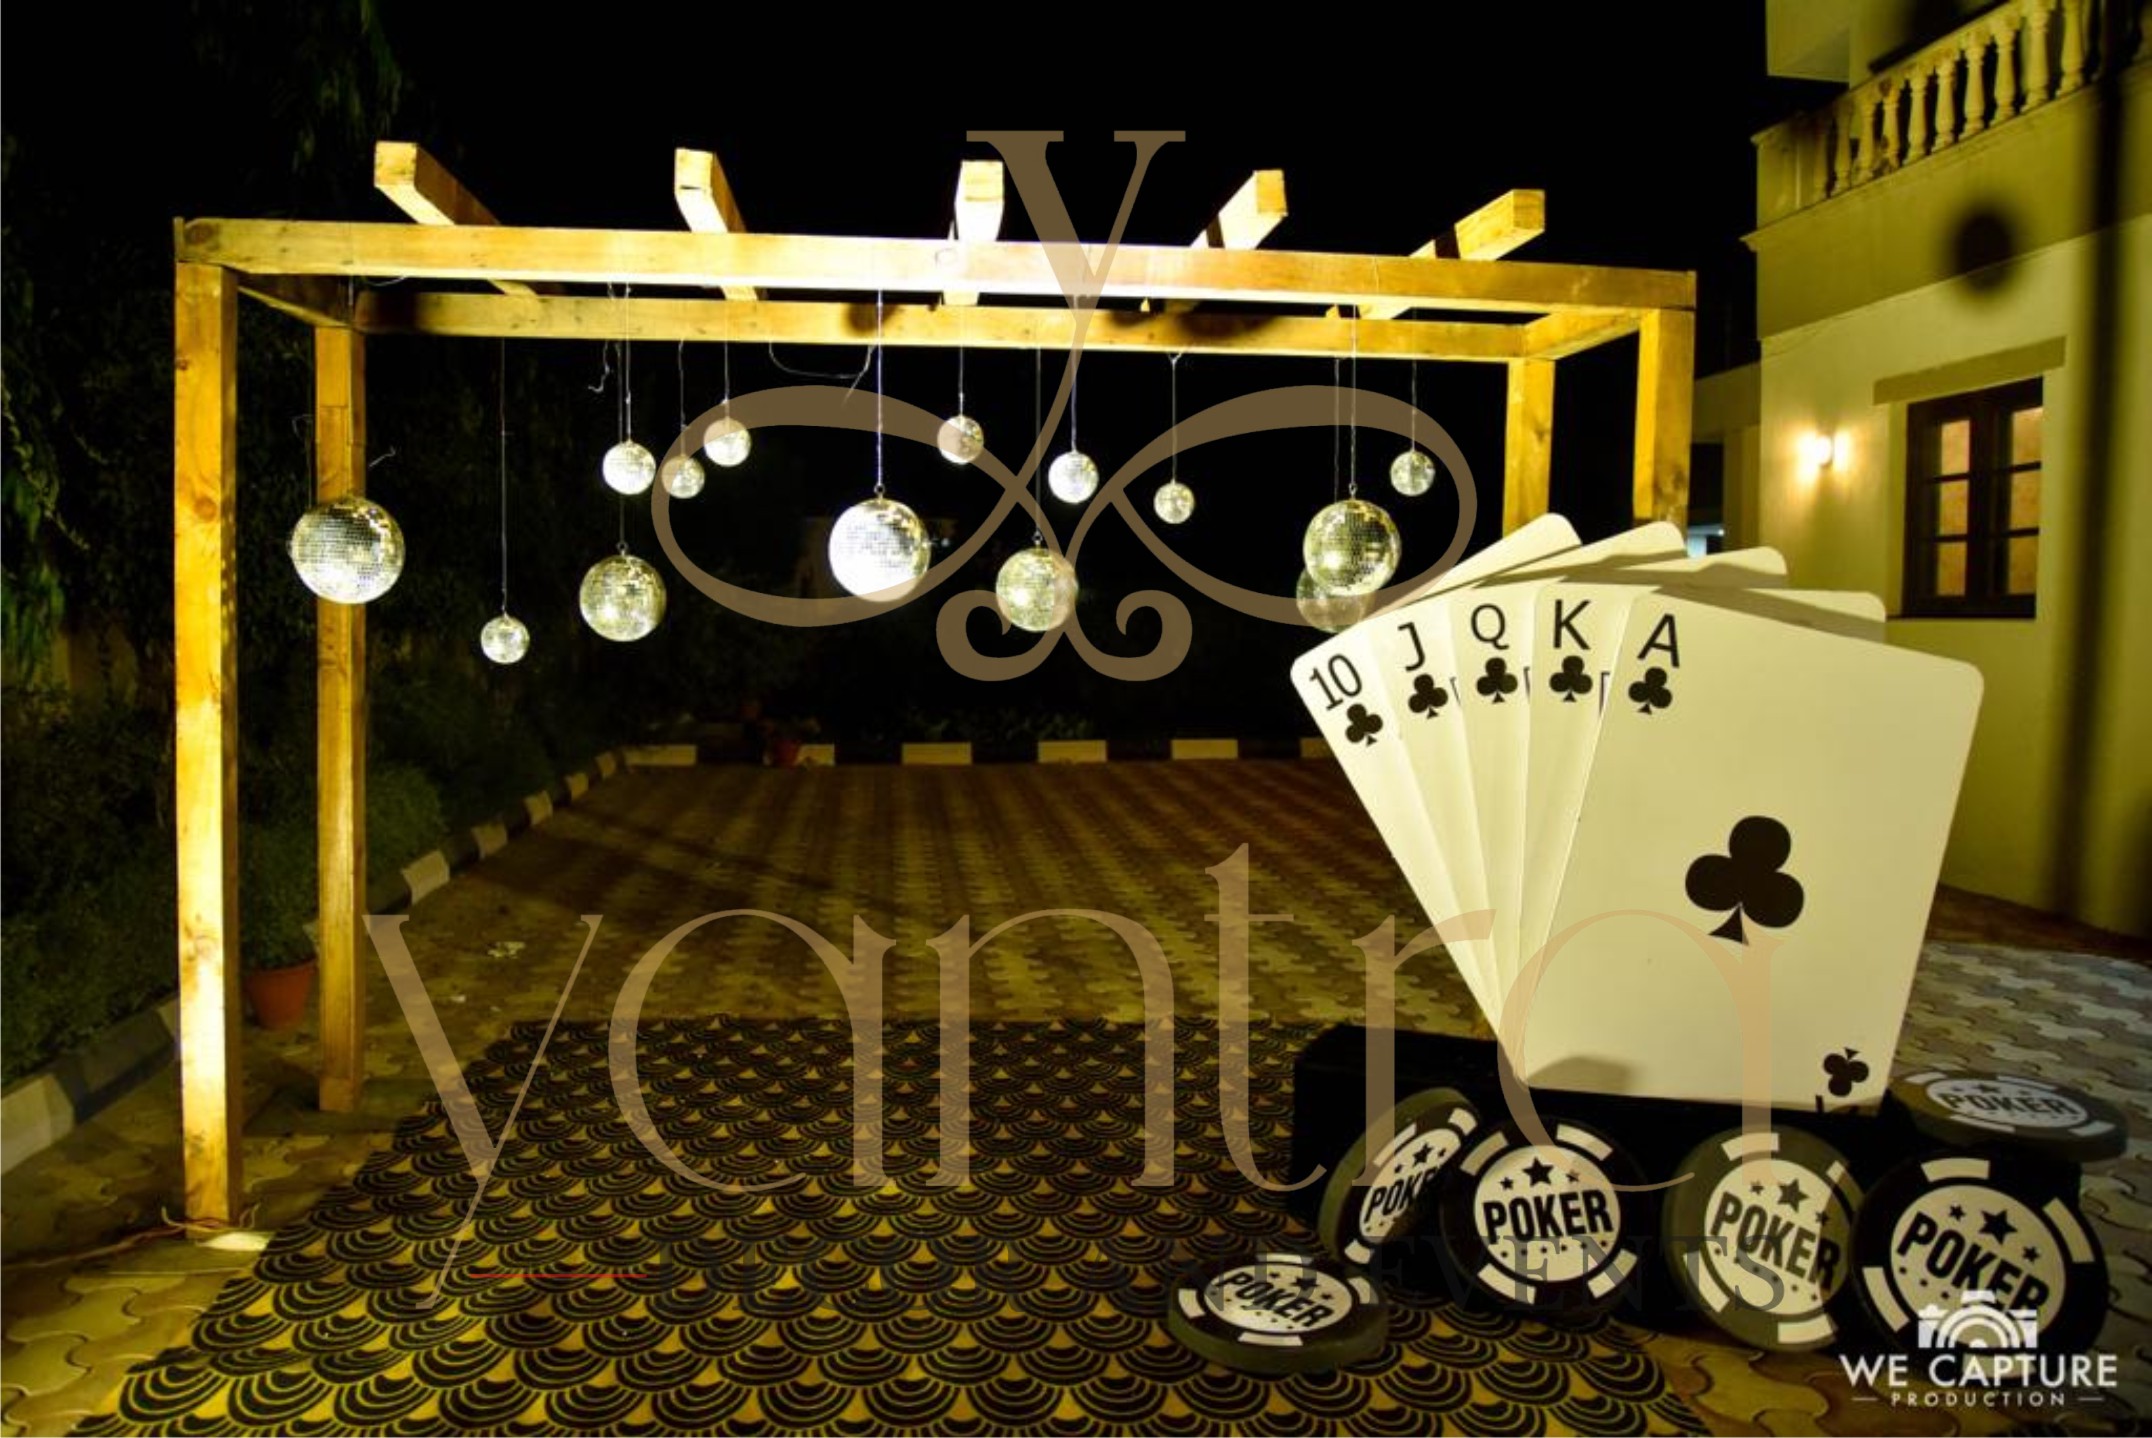 yantra-decor-events-theme-party-image-photo-booth